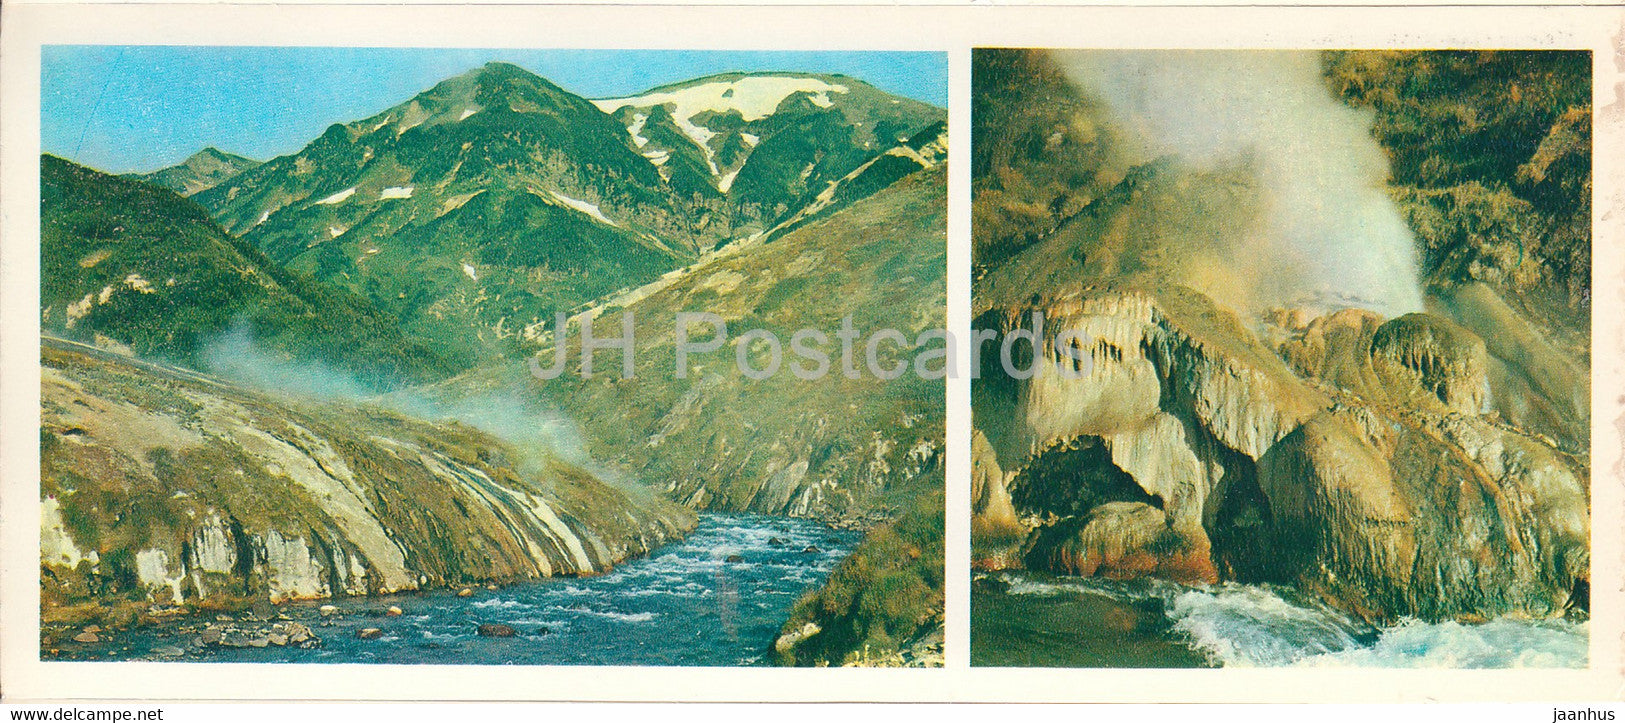 Kronotsky Nature Reserve - Geysernaya river canyon and Malachite grotto - 1981 - Russia USSR - unused - JH Postcards